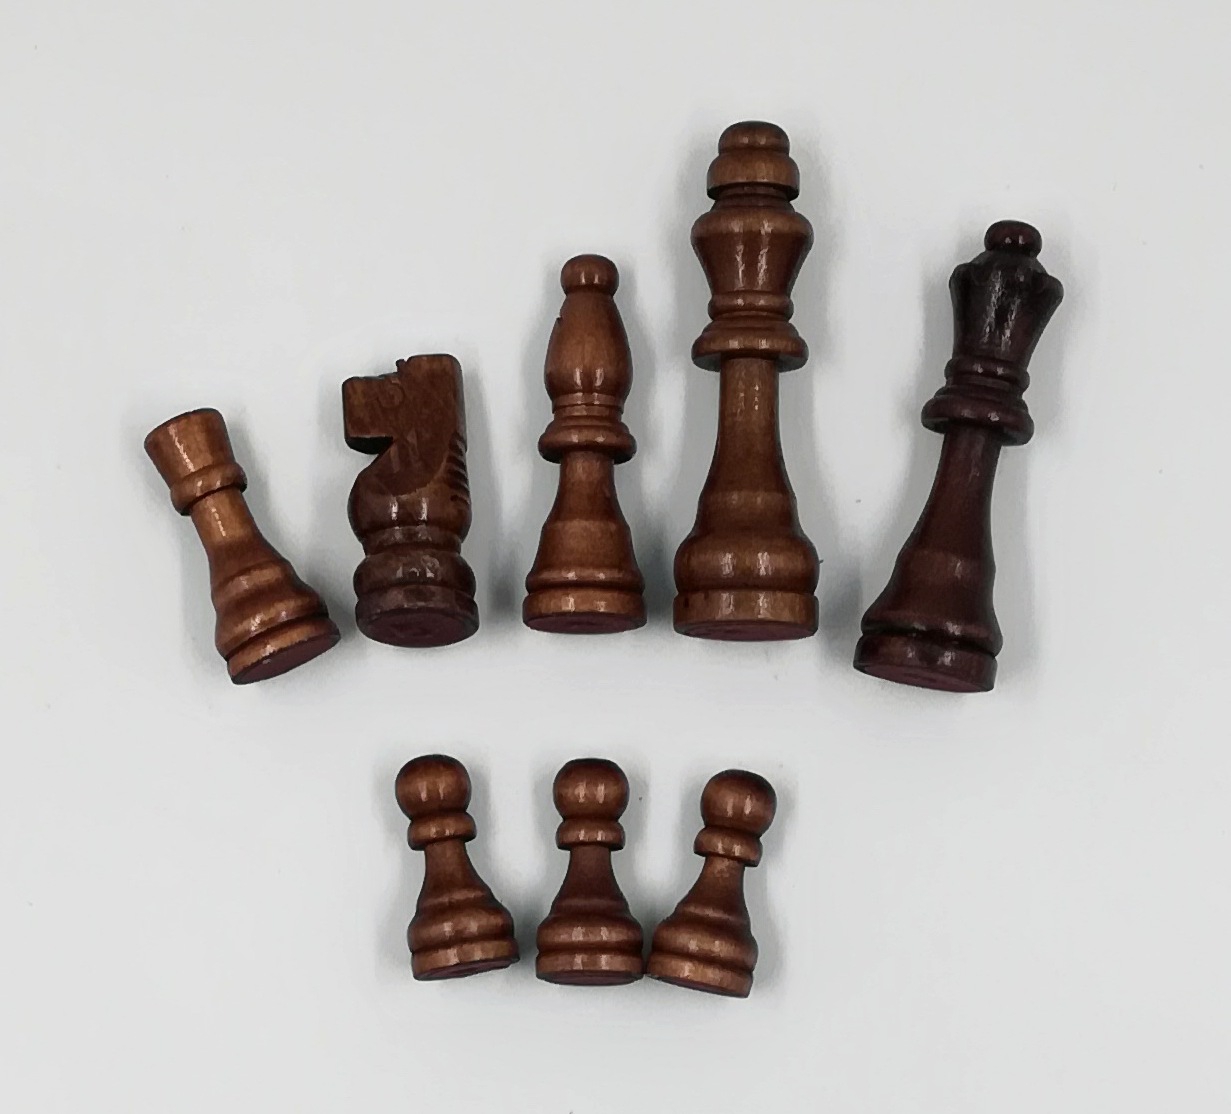 Wooden%20chess%20pieces%20